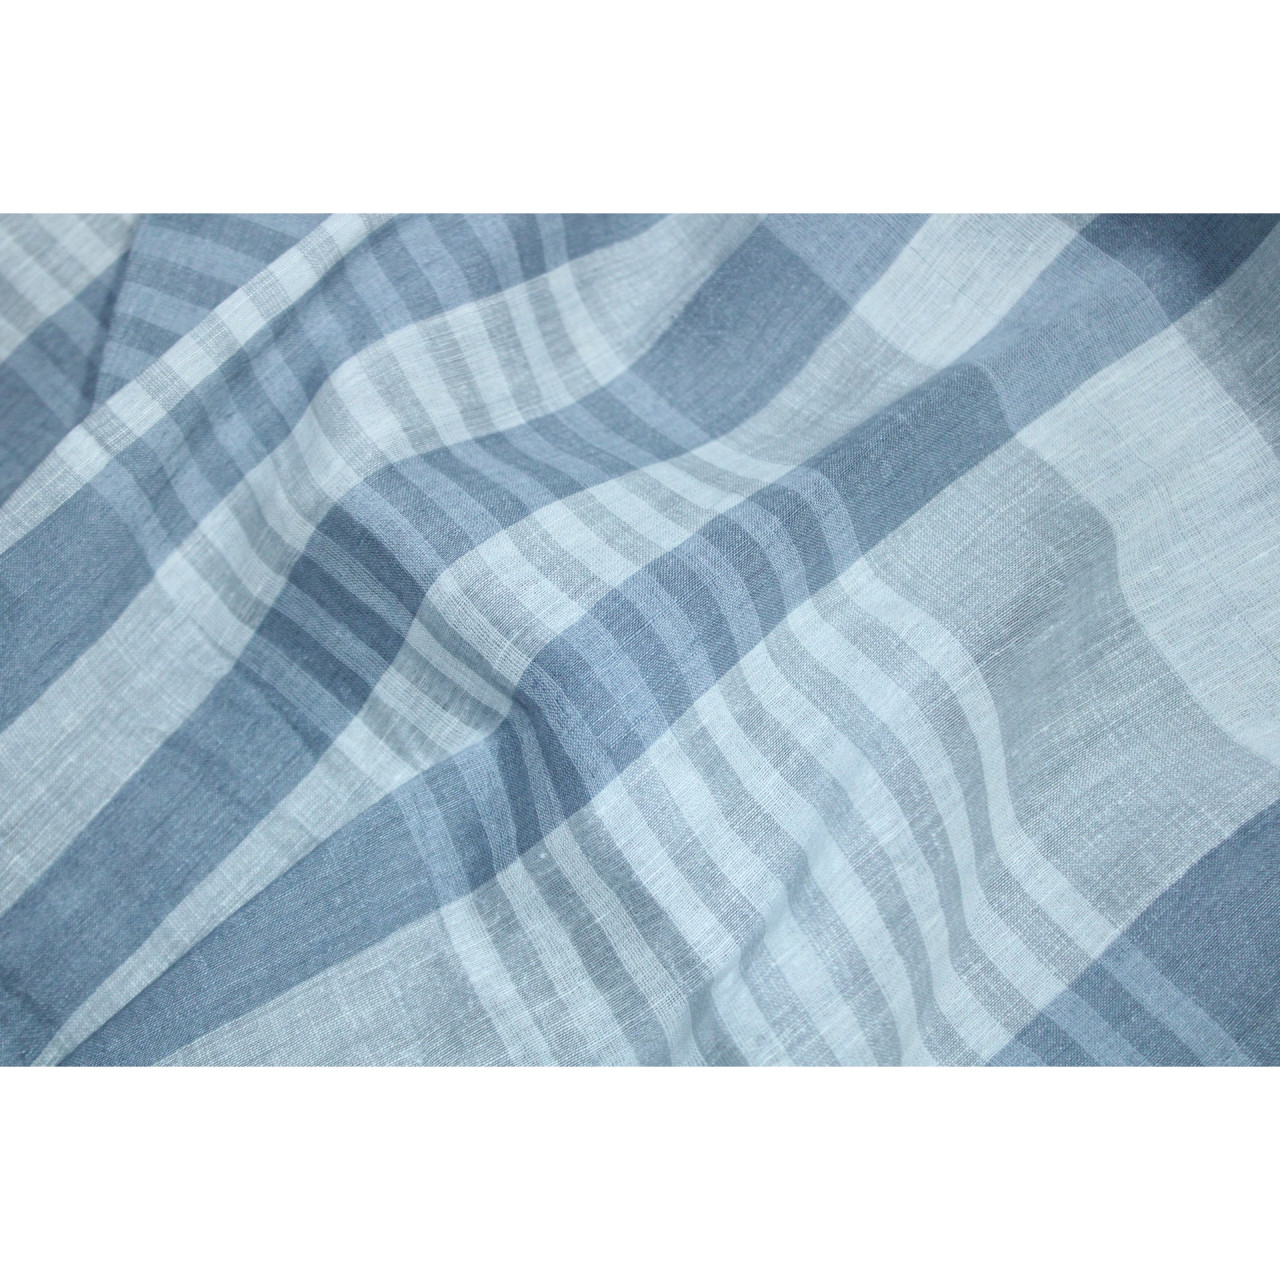 (2075) Khadi  and linen Azo-free dyed stole from Shantipur - Grey, white, stripes